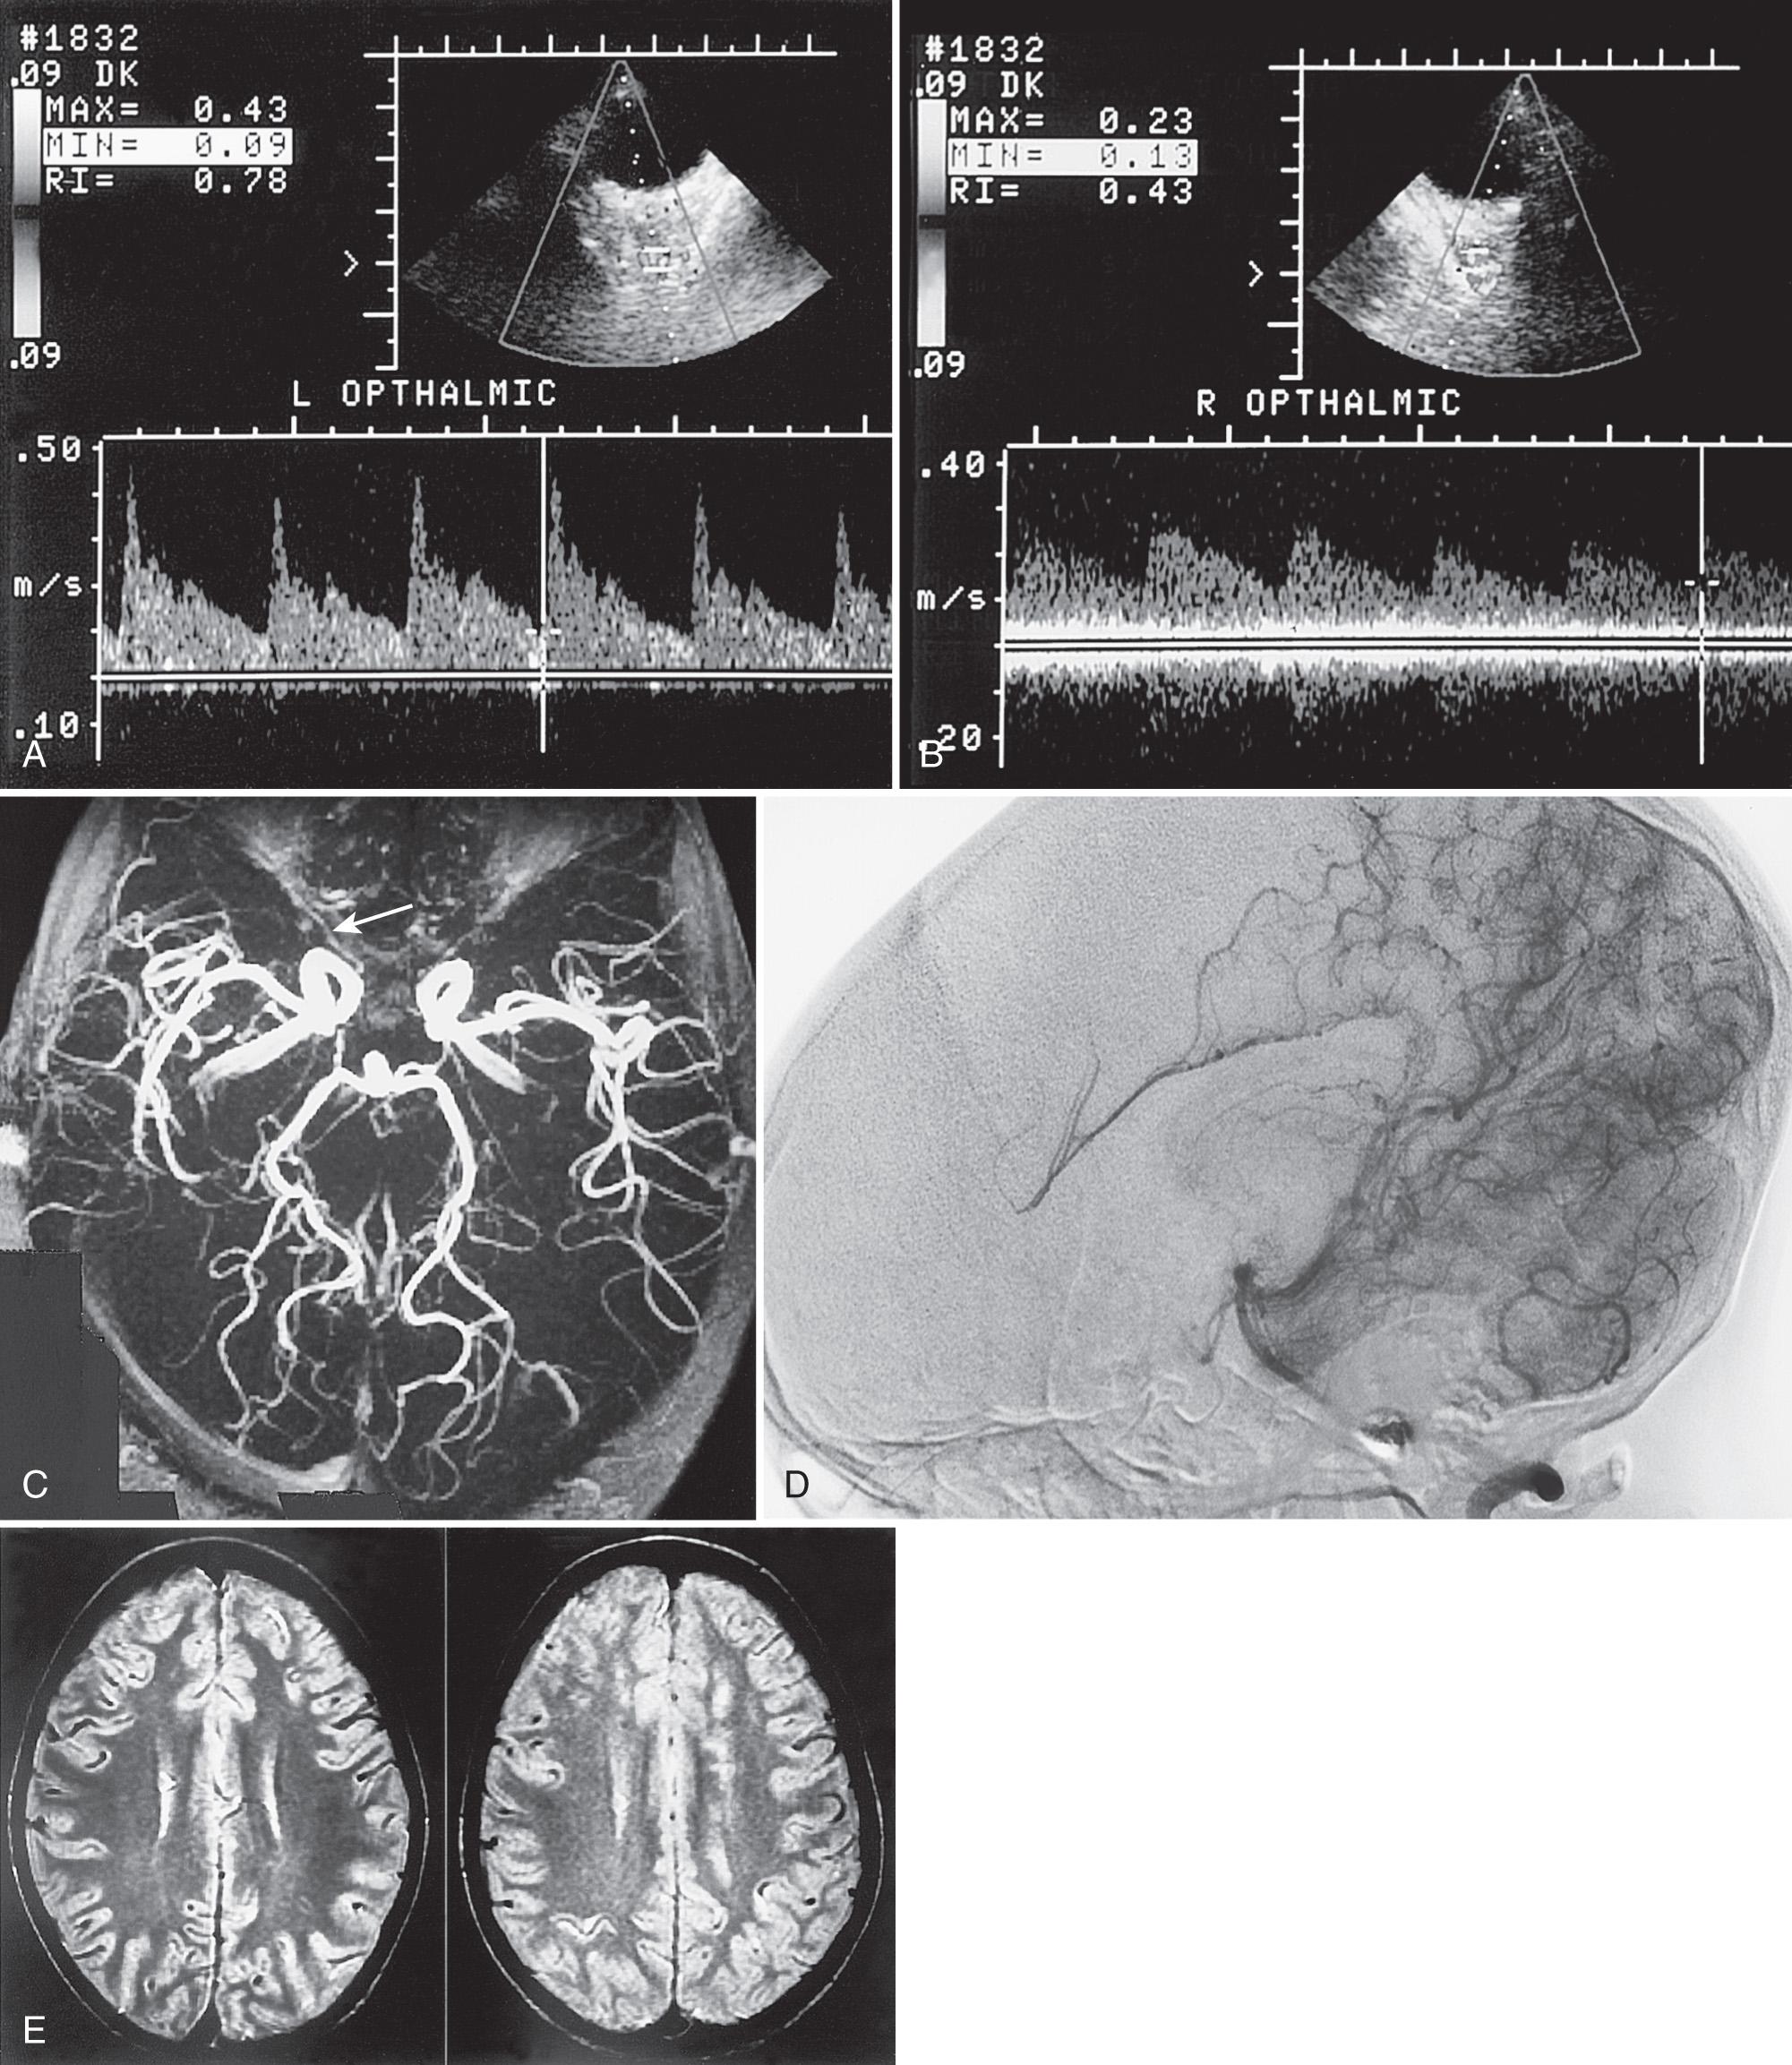 FIG. 47.7, Developing Stroke in Asymptomatic 13-Year-Old Boy With Sickle Cell Anemia.